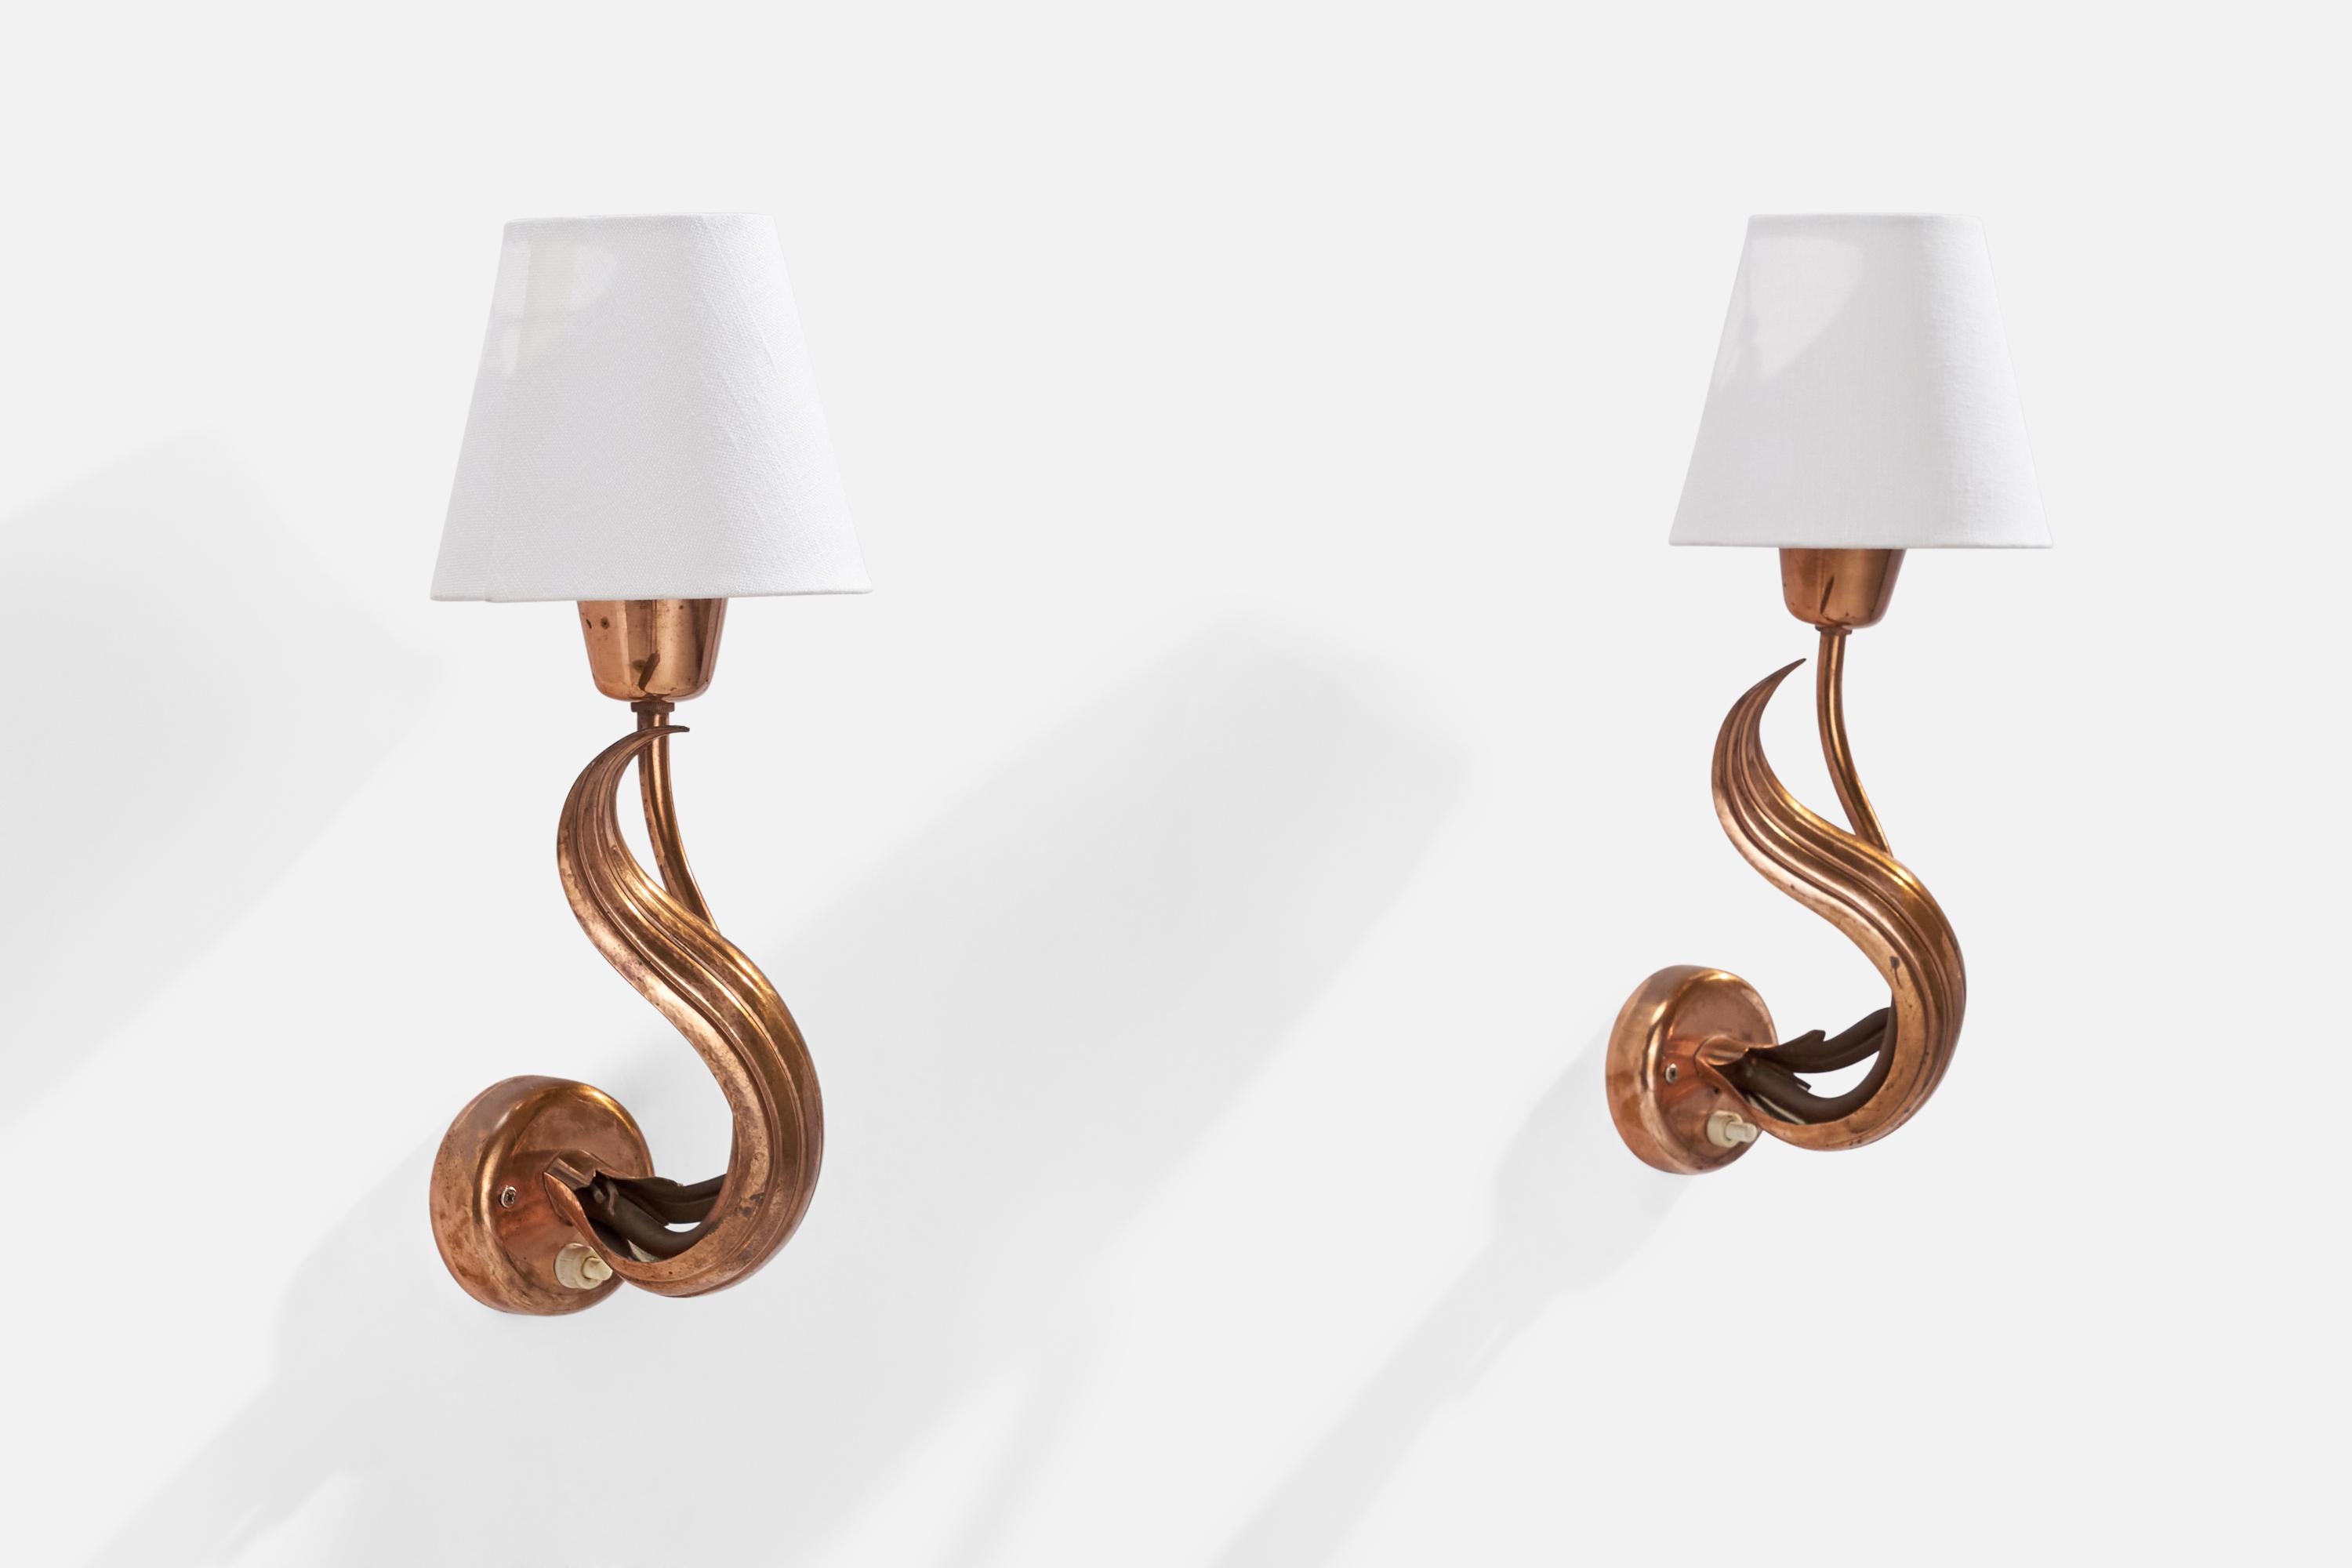 A pair of copper and white fabric wall lights designed and produced in Sweden, 1940s.

Overall Dimensions (inches): 10.5” H x 4.25”  W x 5” D
Back Plate Dimensions (inches): 2.75”  H x 2.75”  W x .75” D
Bulb Specifications: E-14 Bulb
Number of